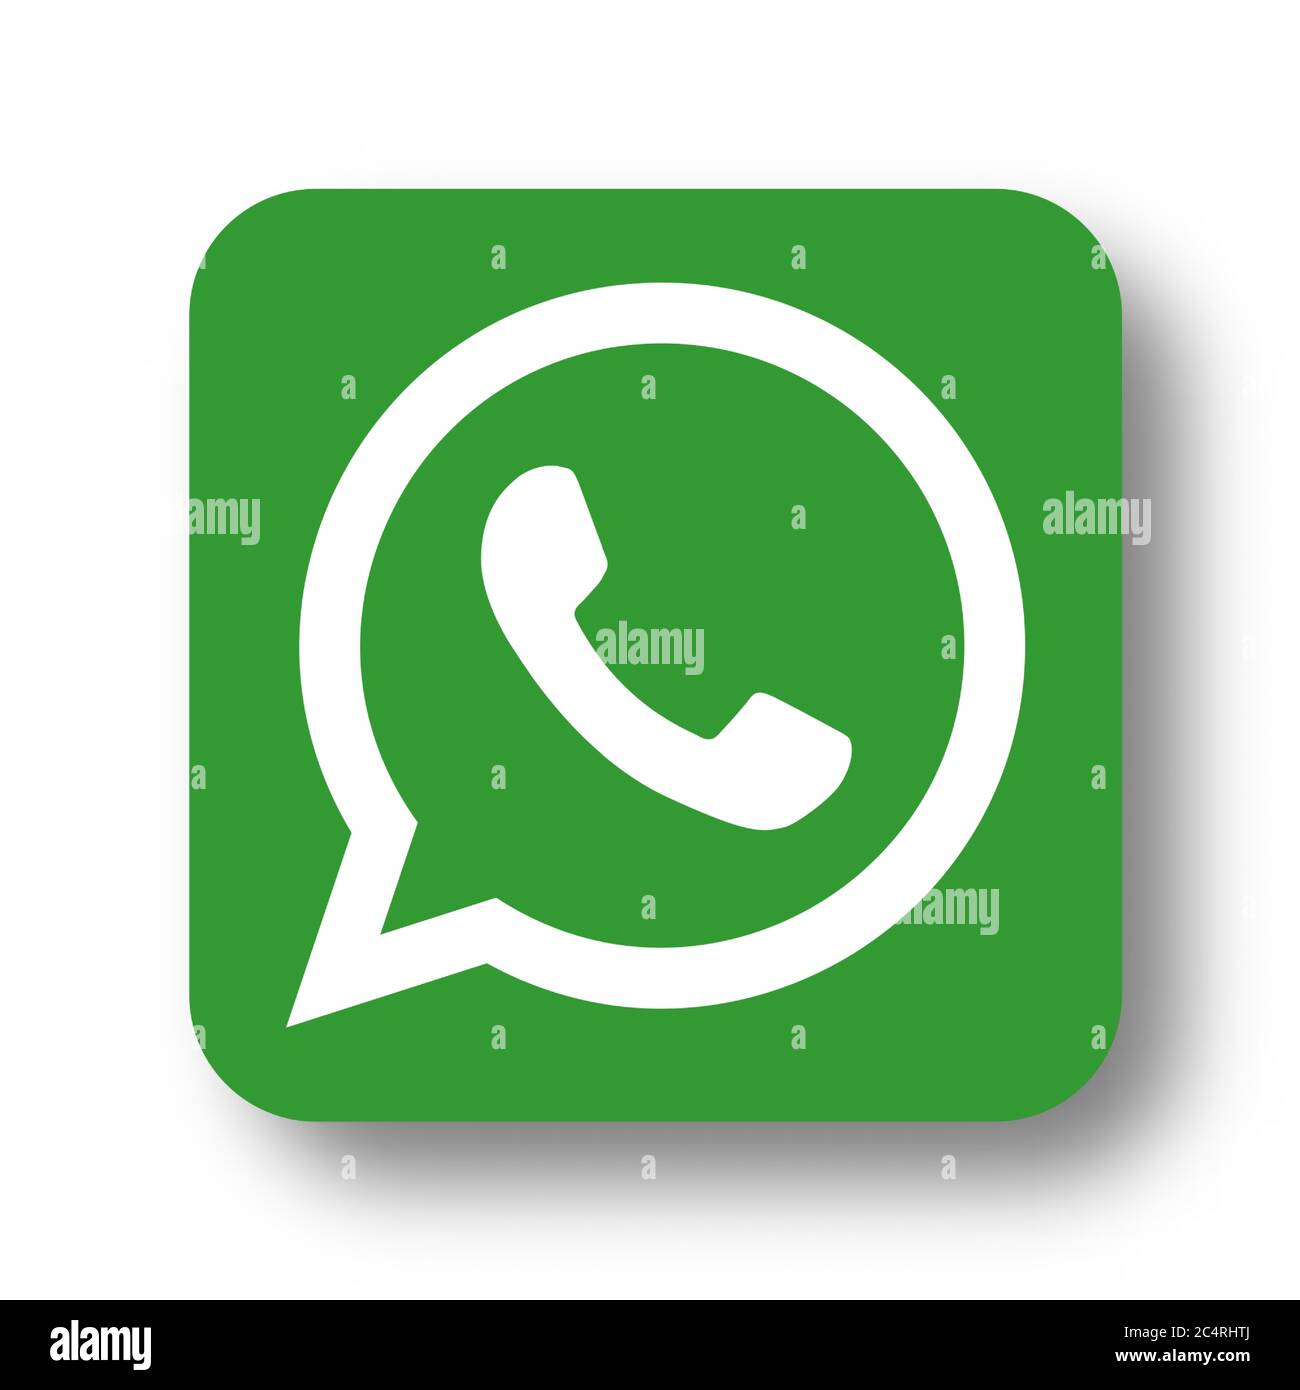 VORONEZH, RUSSIA - JANUARY 31, 2020: Whatsapp logo green square icon with soft shadow Stock Vector